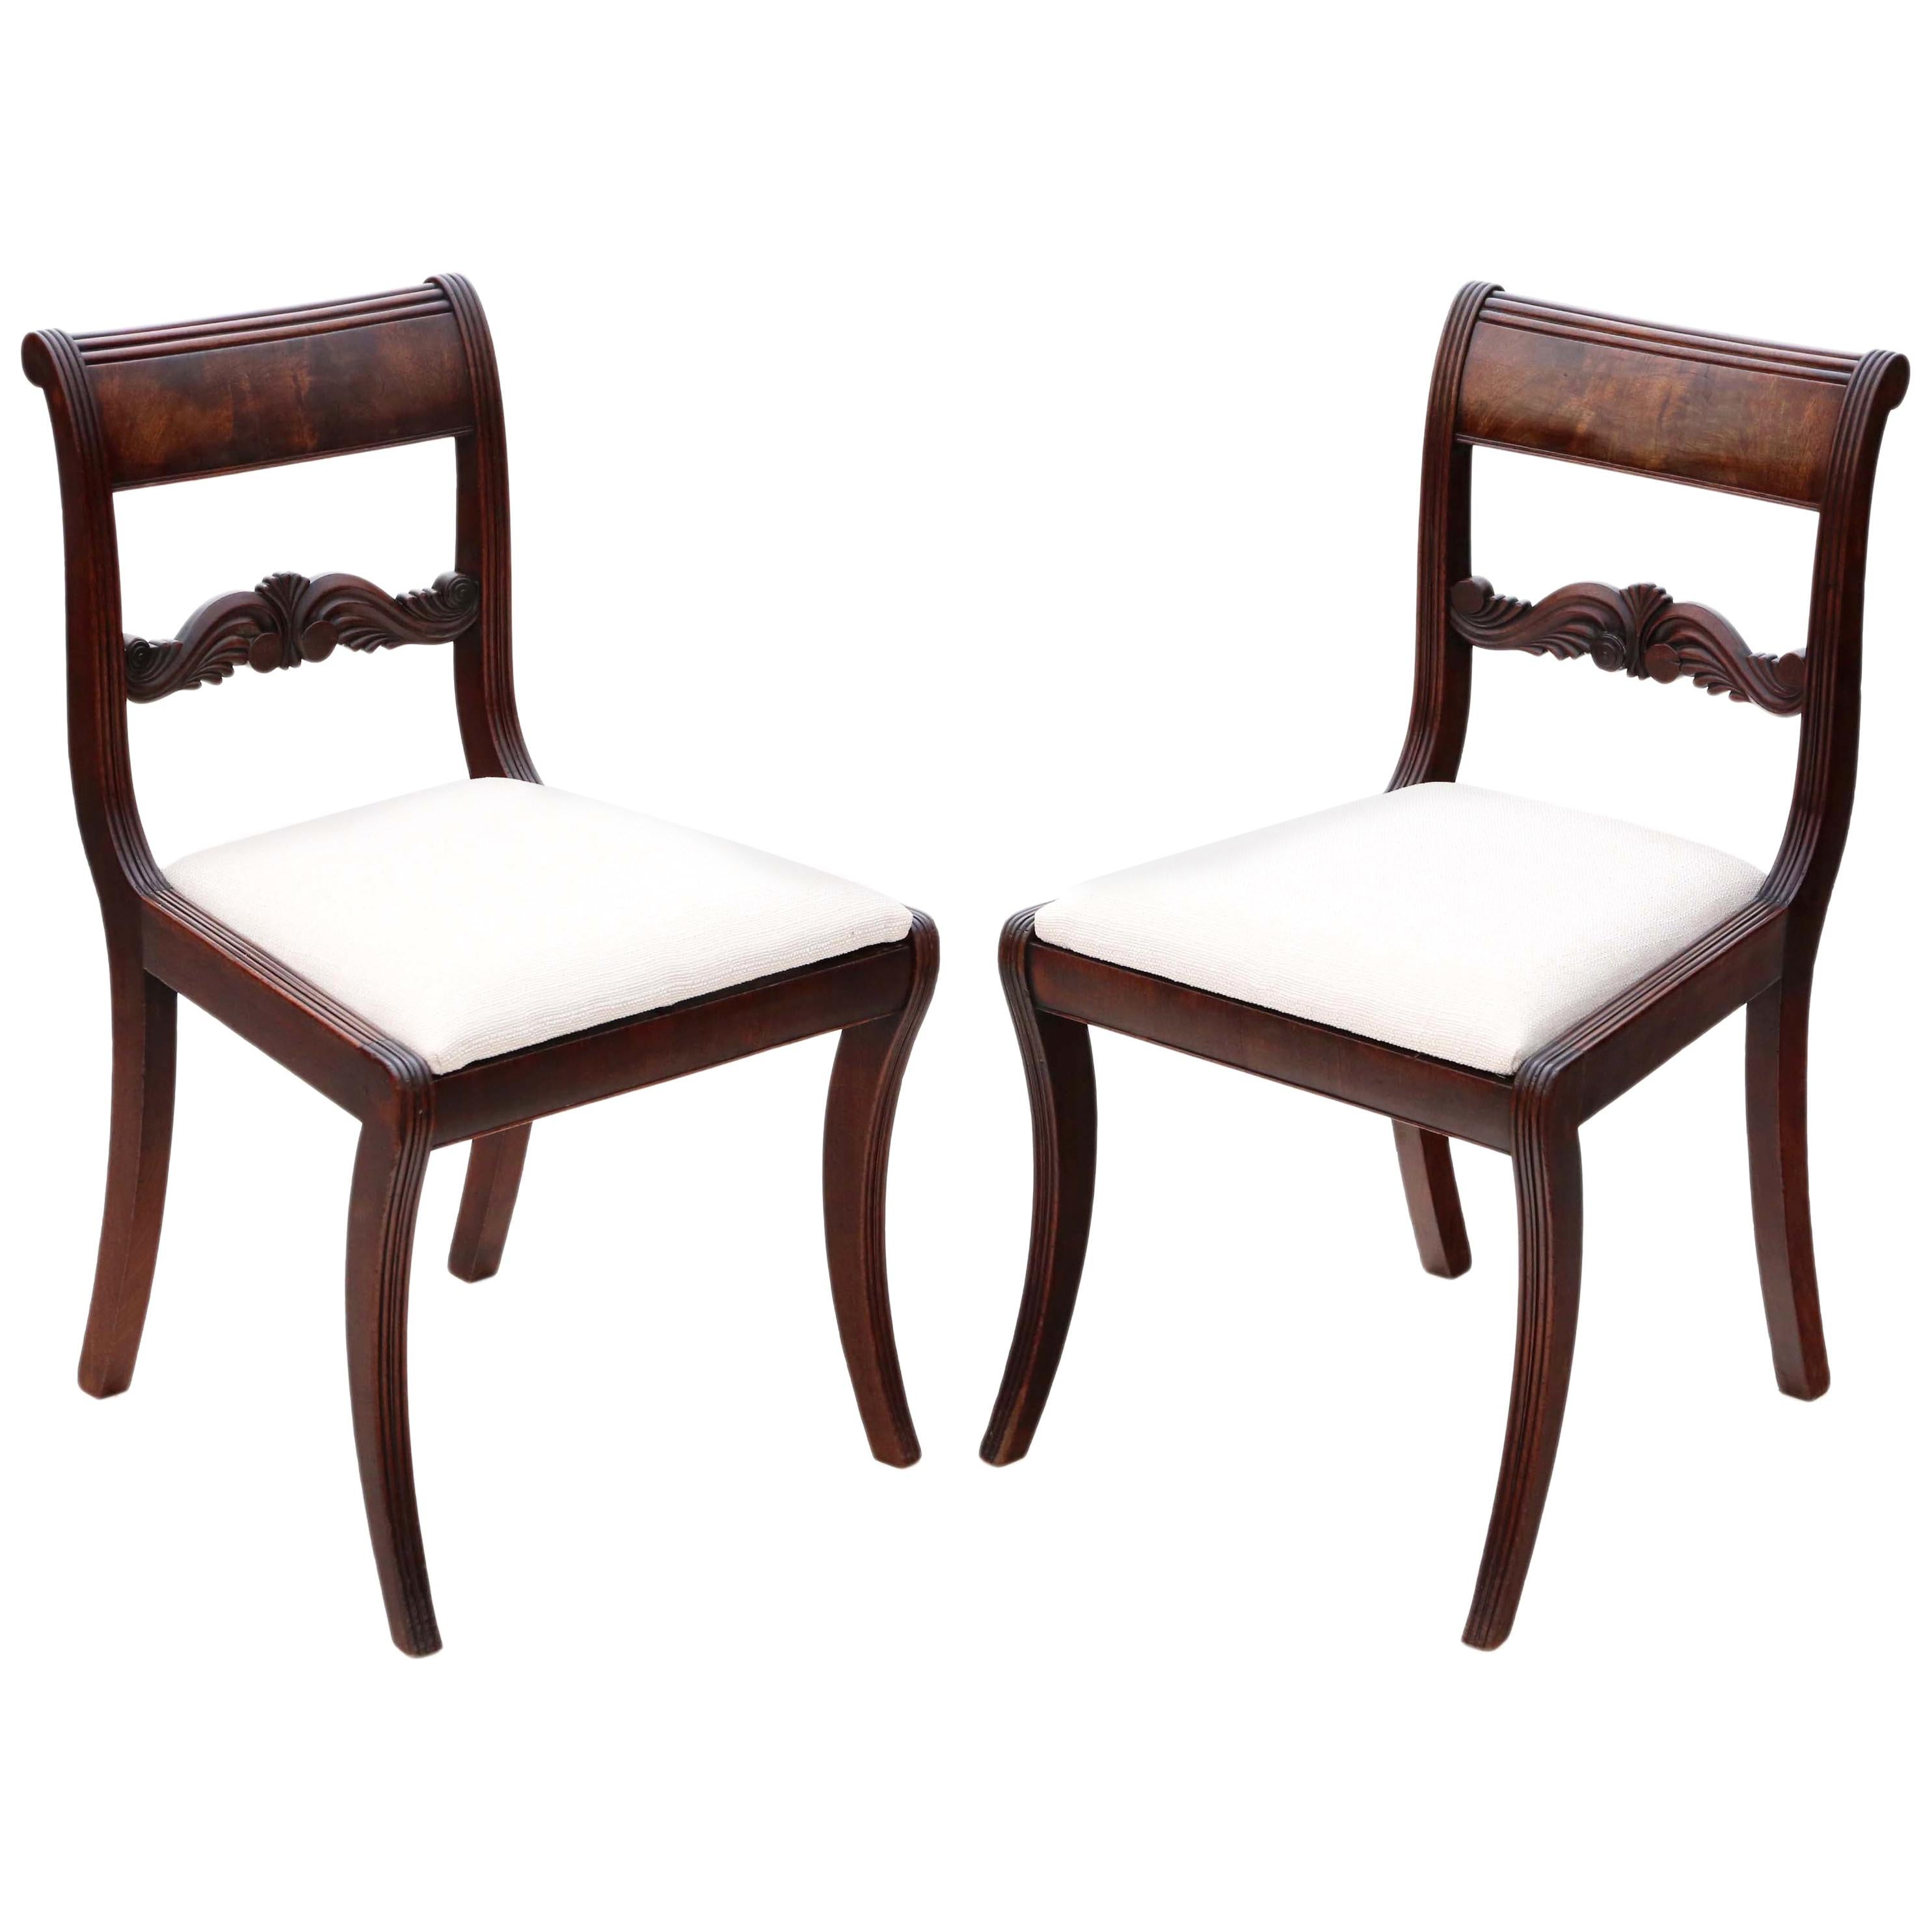 Antique Pair of Regency Mahogany Dining Side Hall Bedroom Chairs, circa 1825